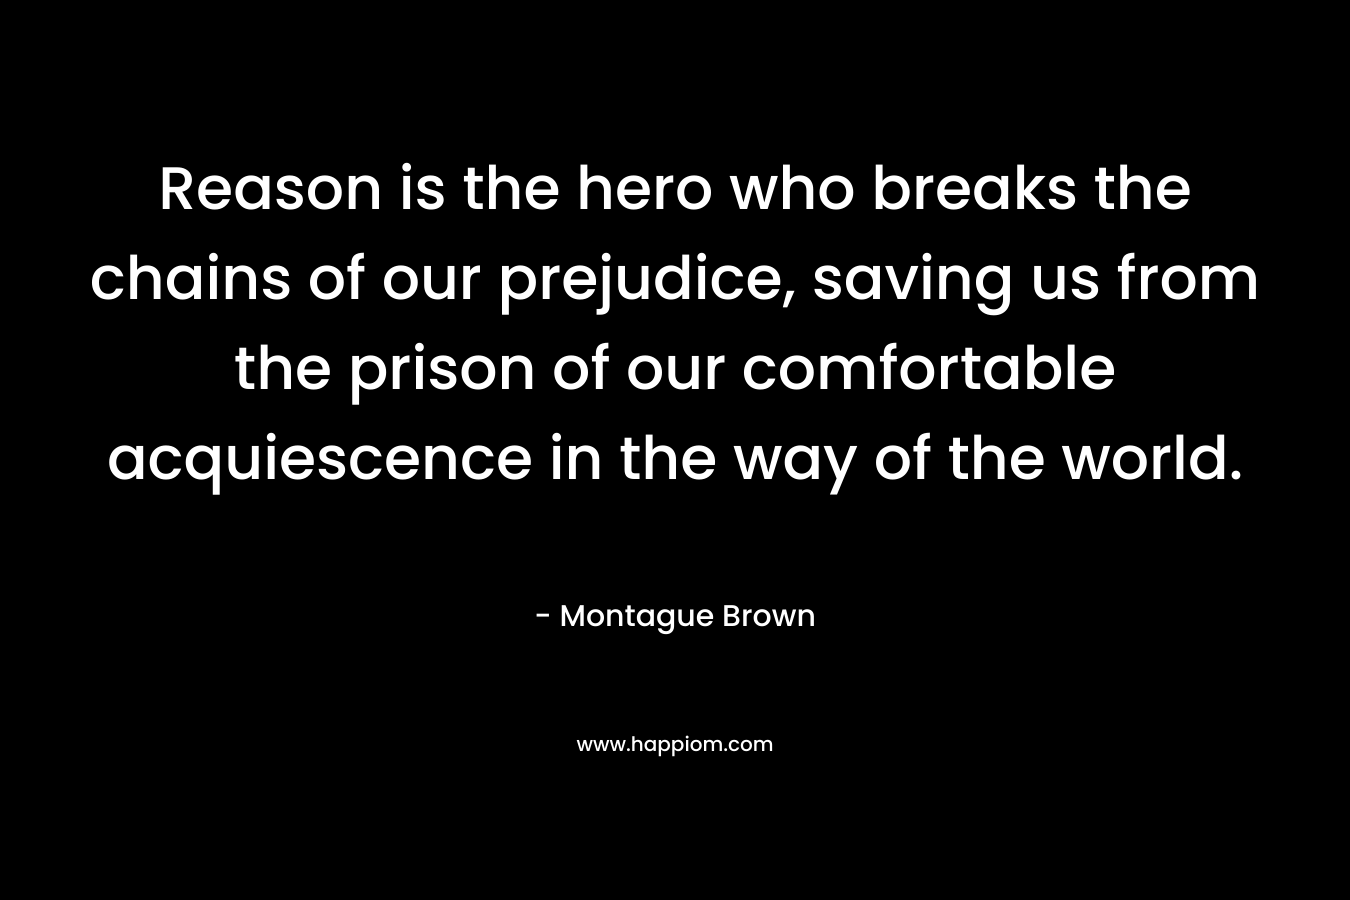 Reason is the hero who breaks the chains of our prejudice, saving us from the prison of our comfortable acquiescence in the way of the world. – Montague Brown